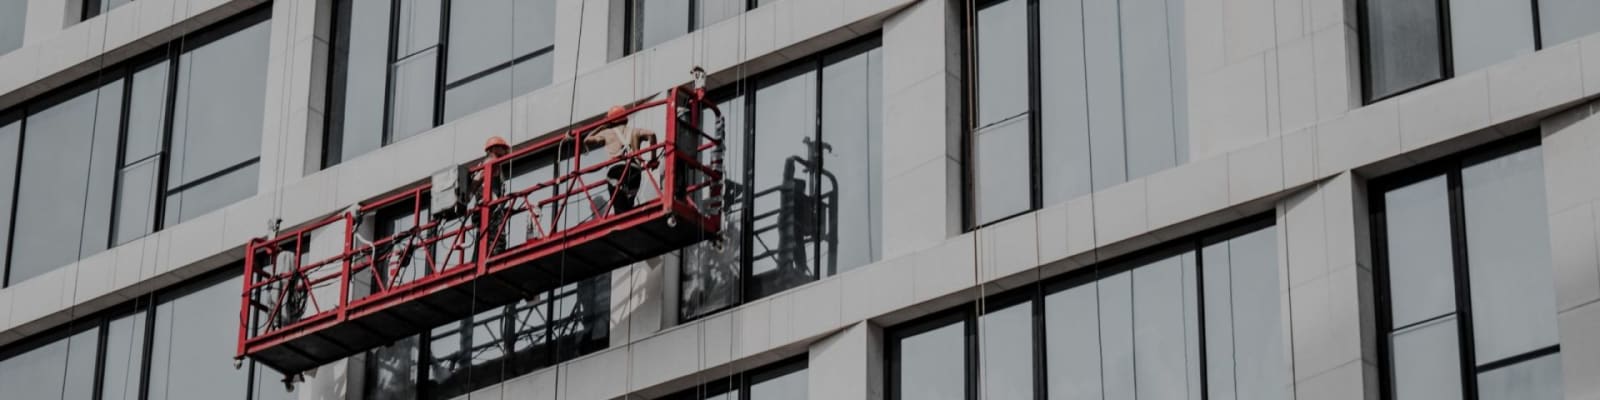 window cleaning services pros in Johannesburg